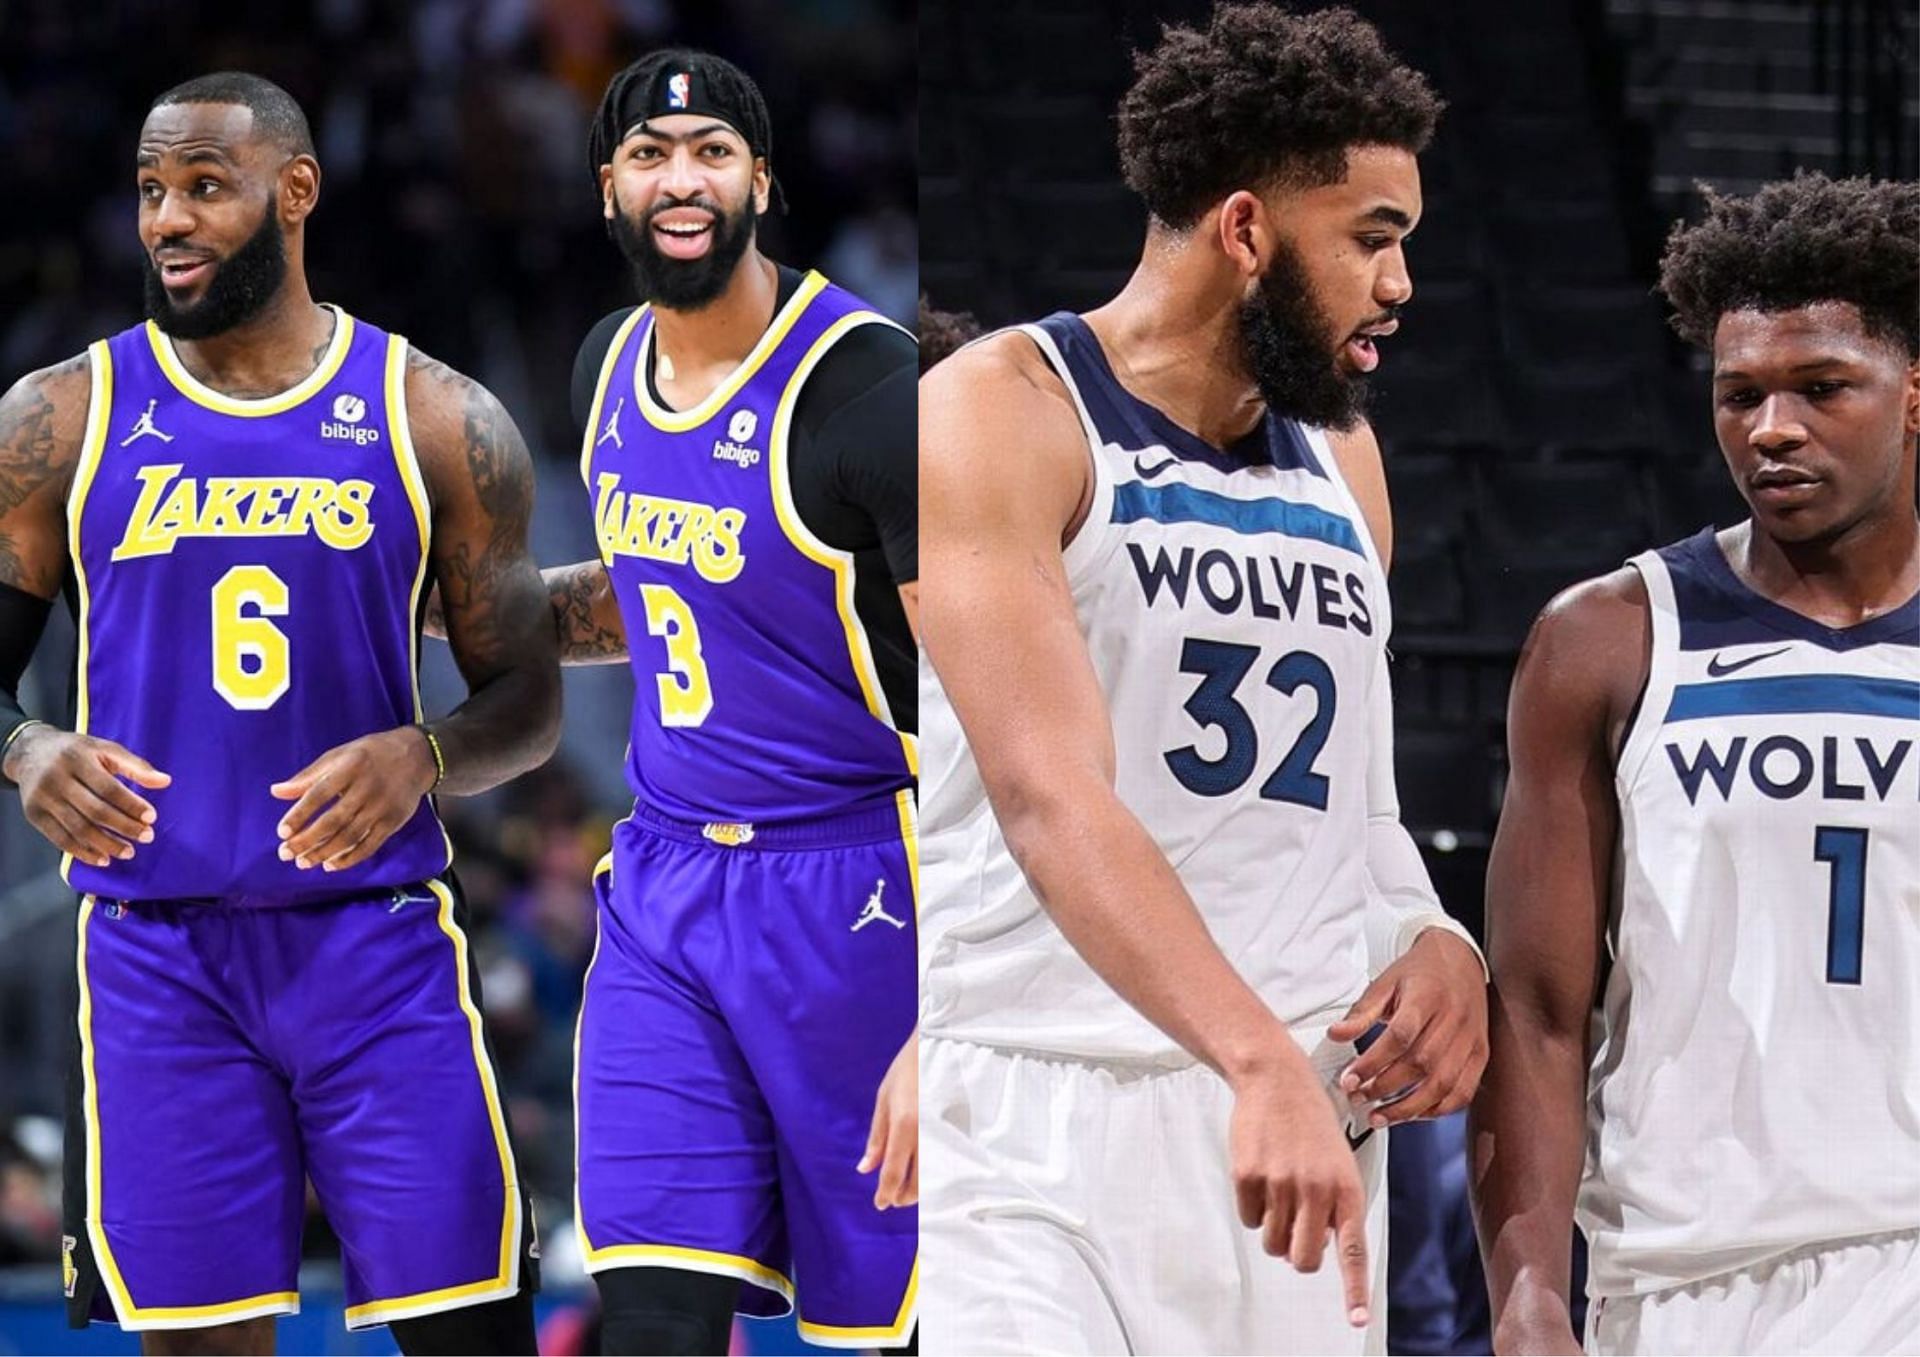 The LA Lakers will square off against the Minnesota Timberwolves in the first play-in game in the Western Conference.